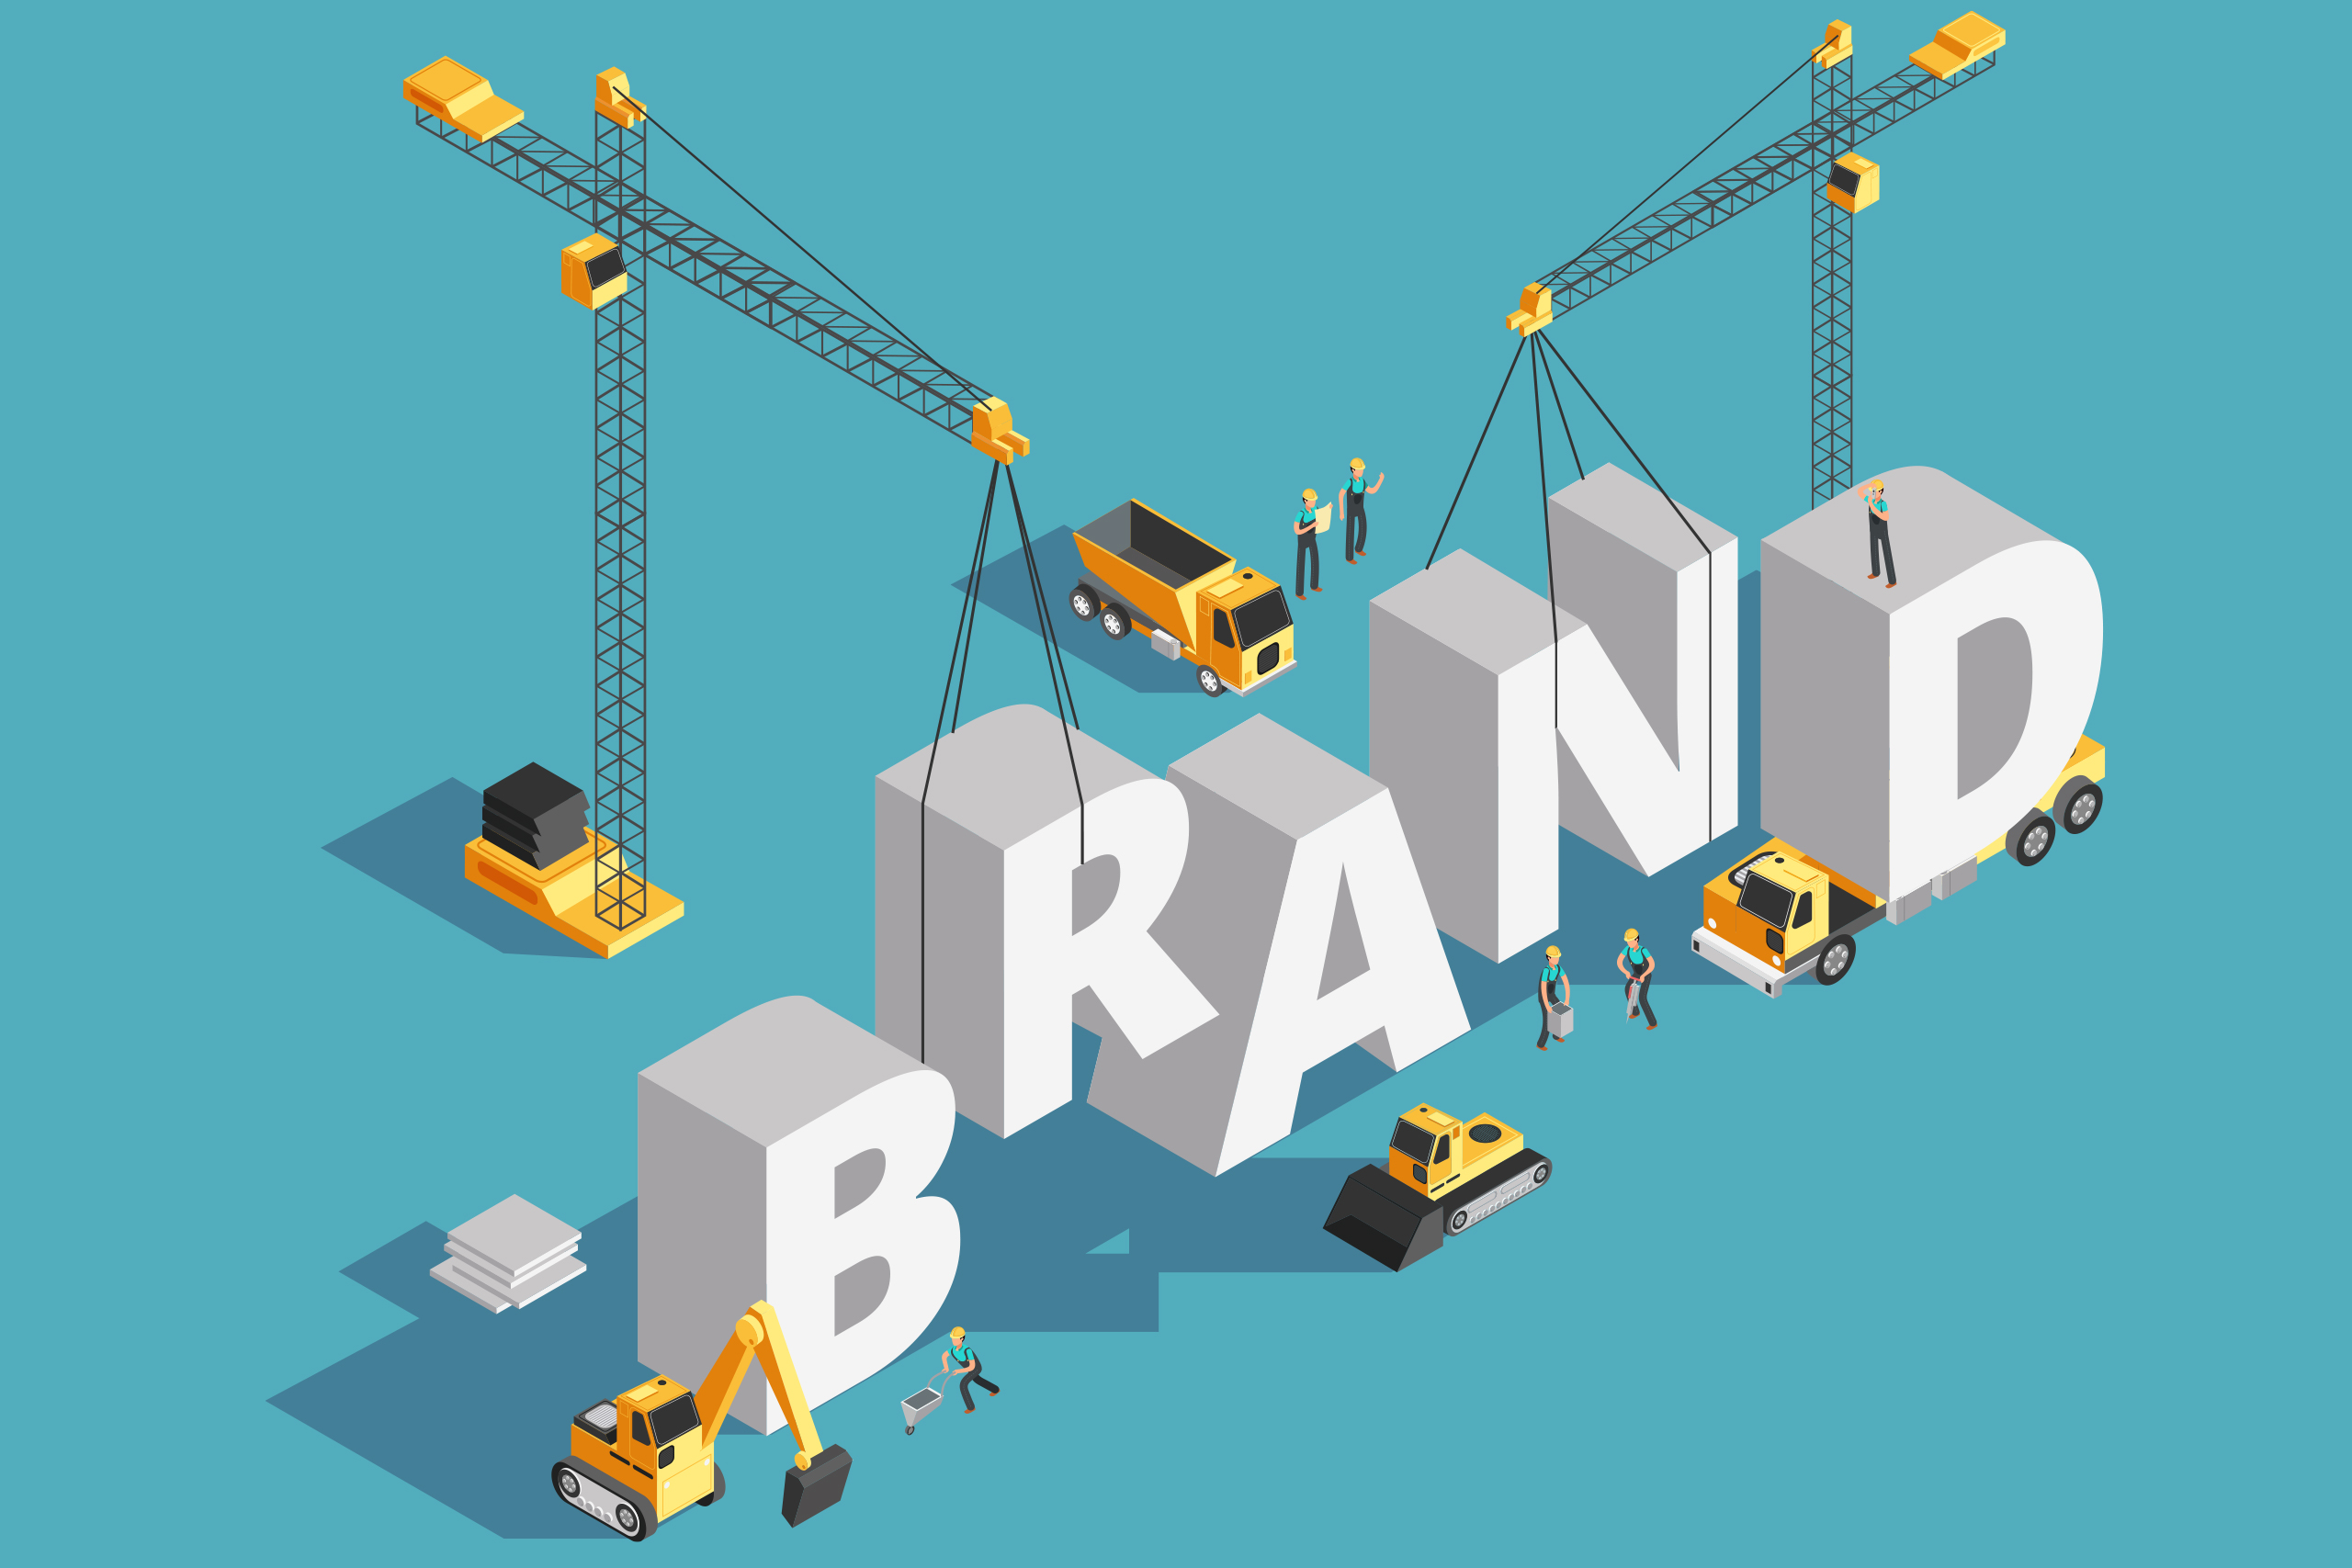 Acquiring A Brand: Four Reasons to Consider It